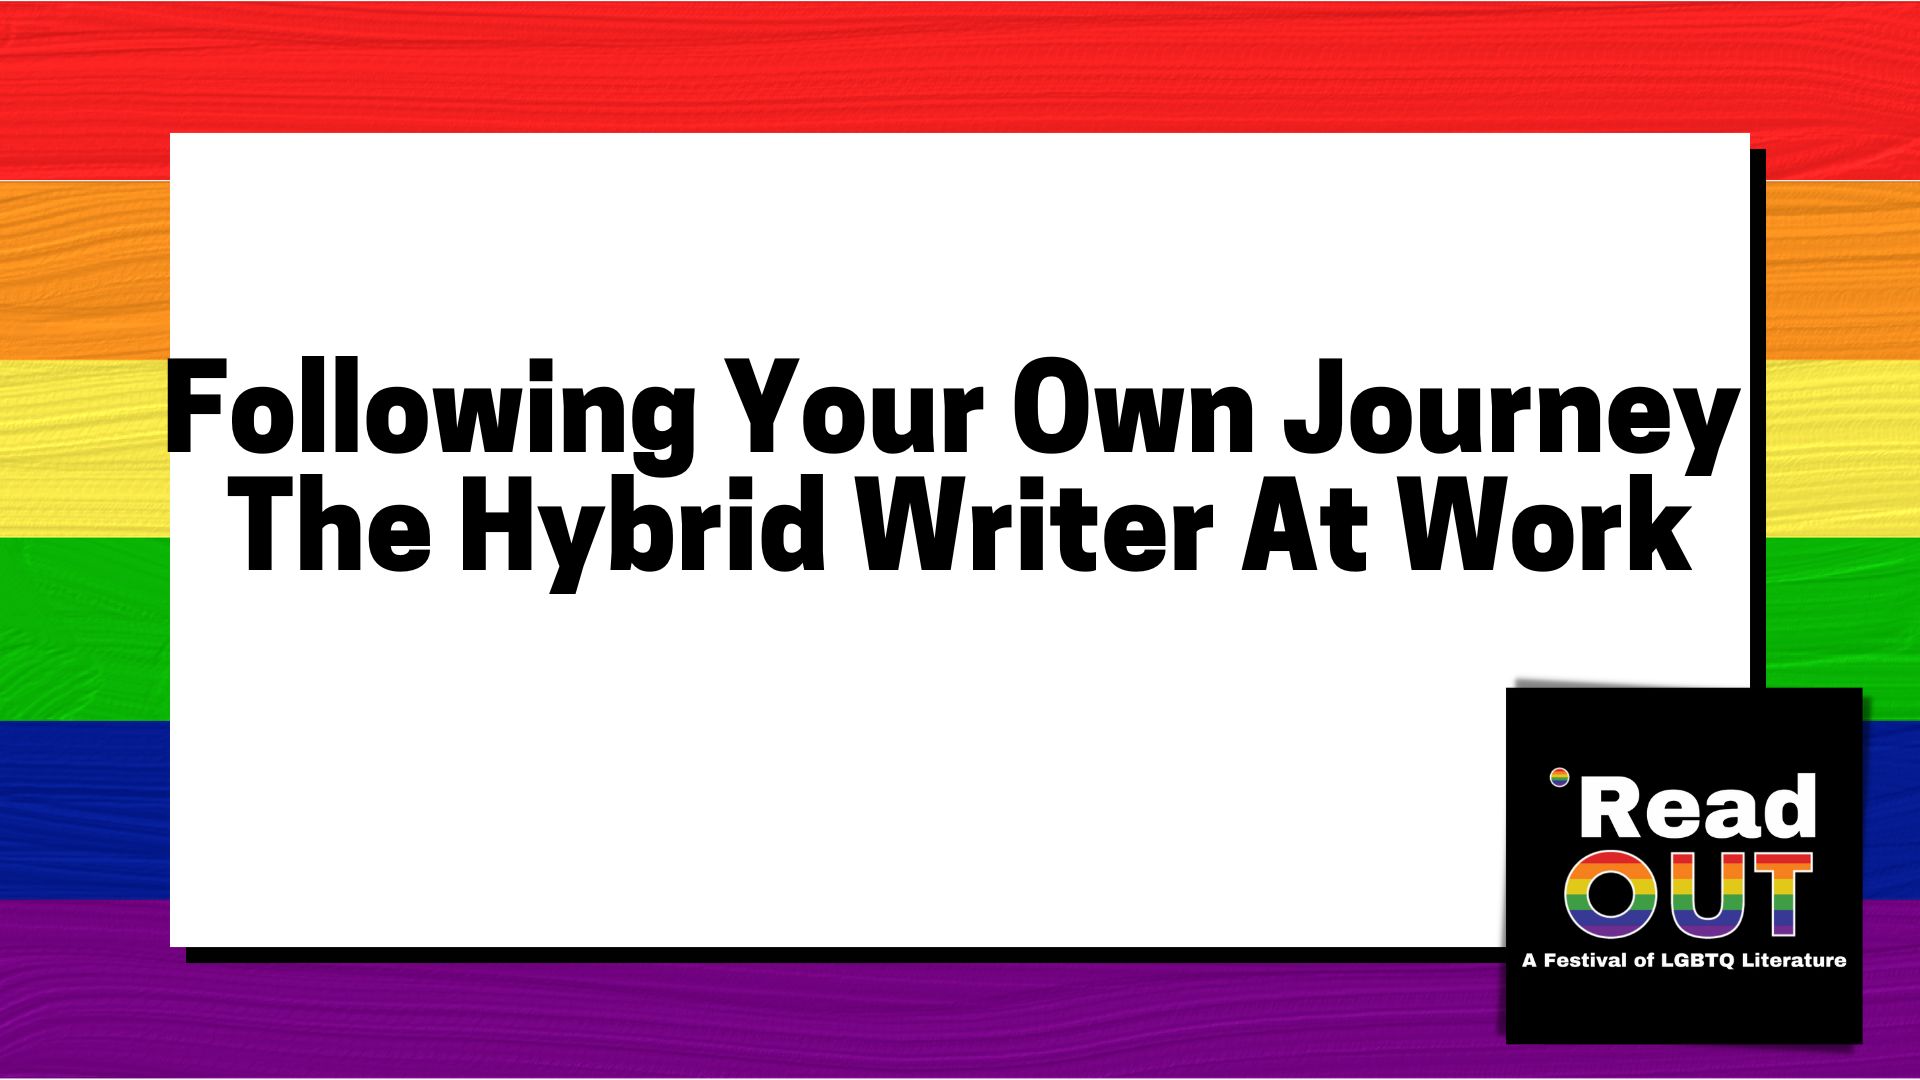 Following Your Own Journey. The Hybrid Writer At Work